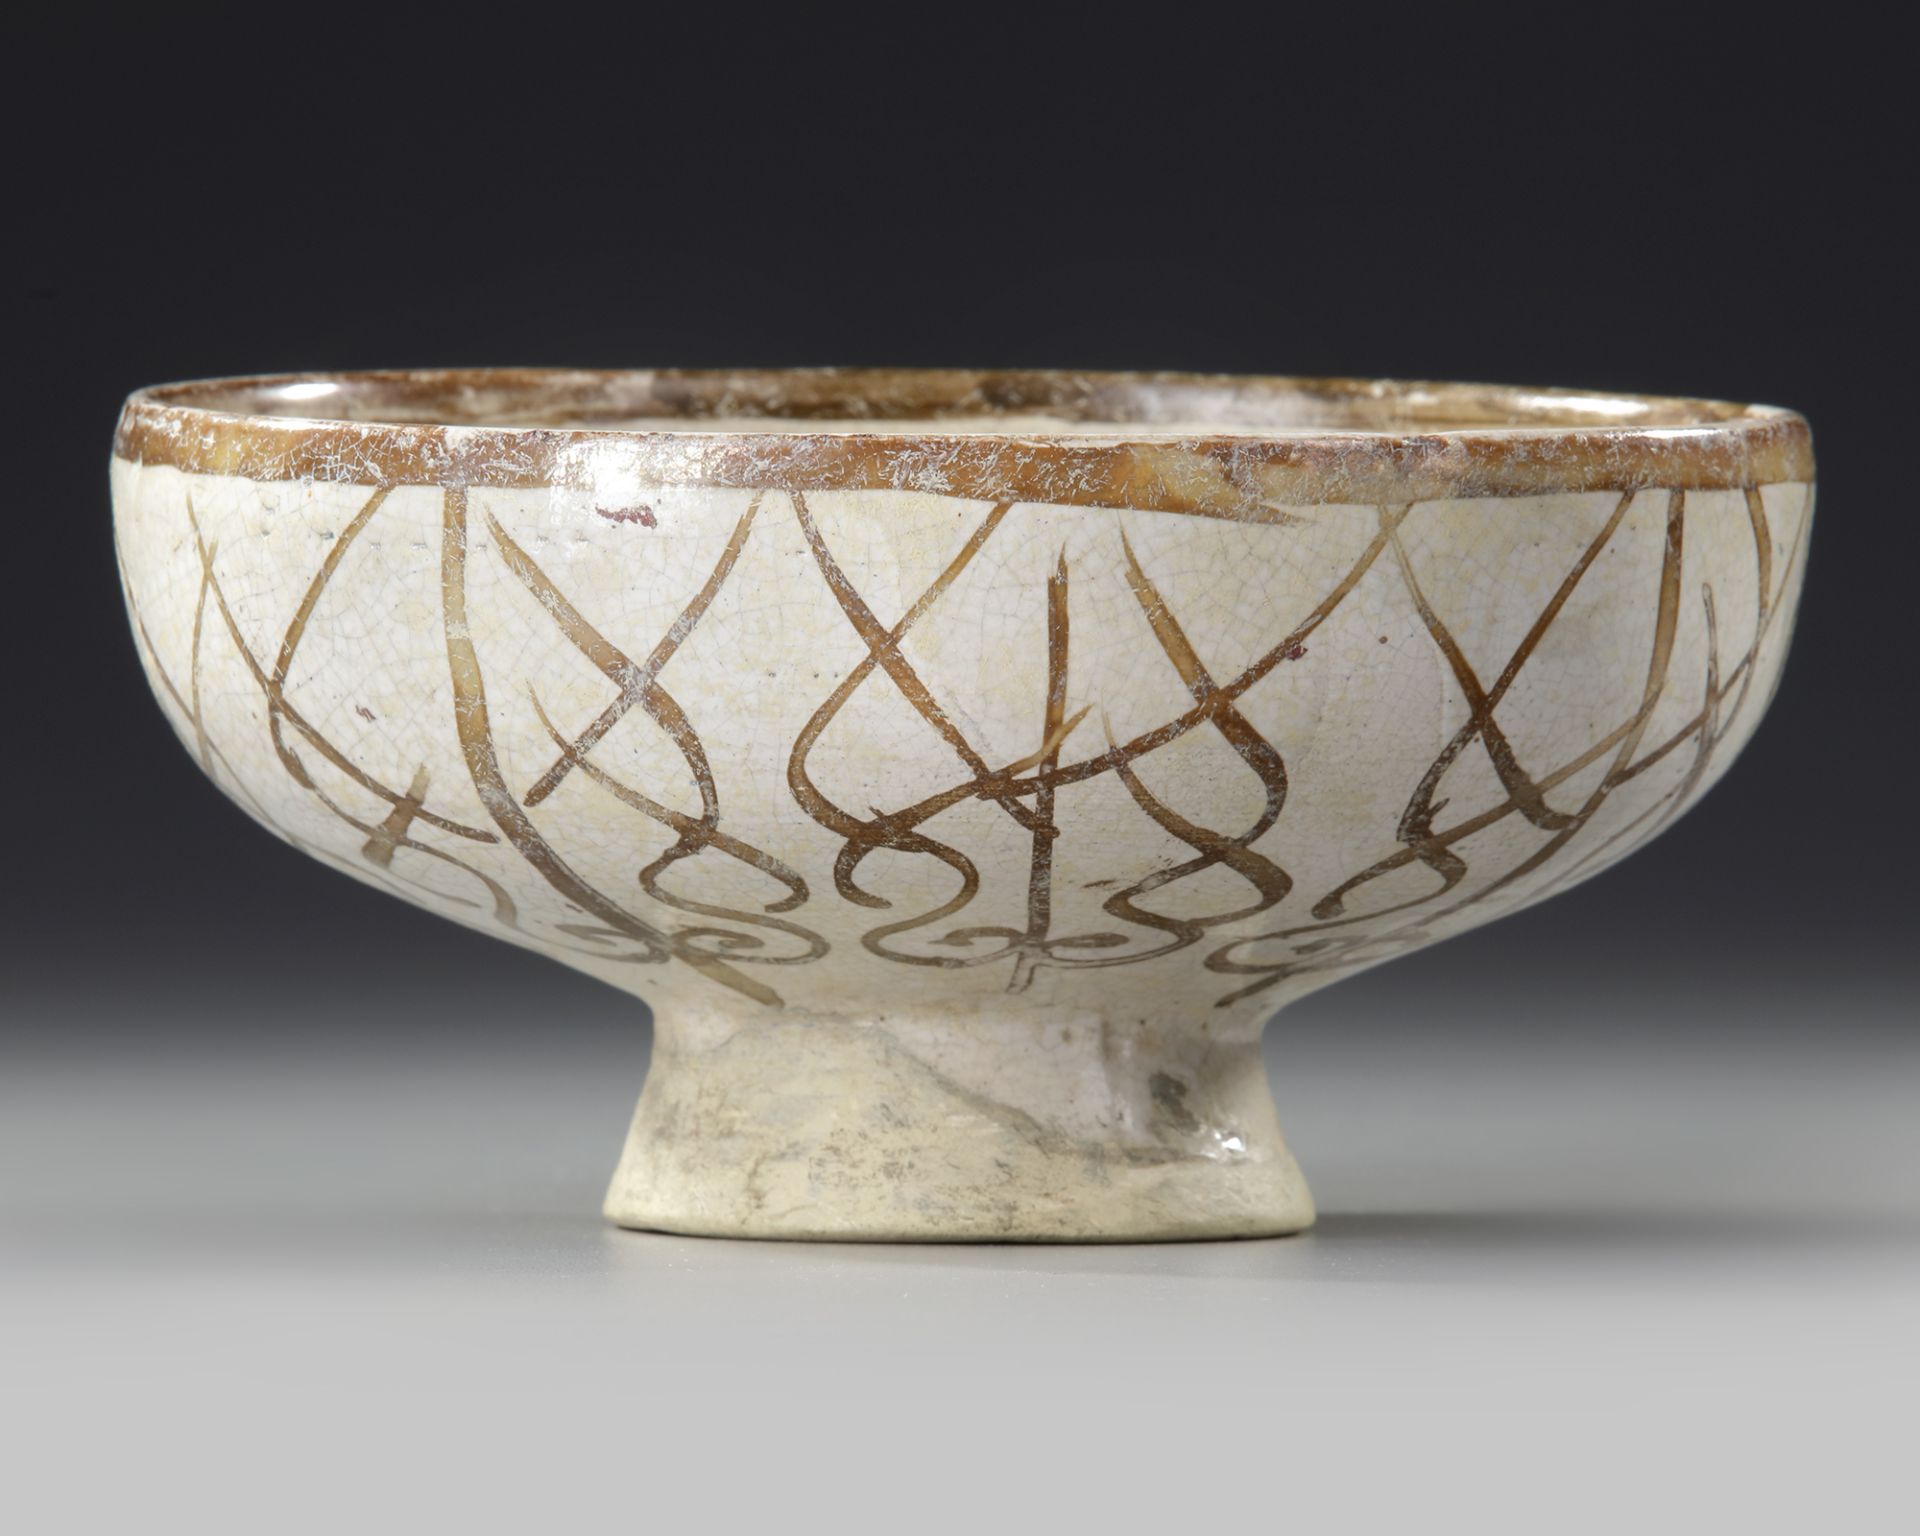 A KASHAN LUSTRE POTTERY BOWL, PERSIA, LATE 12TH - EARLY 13TH CENTURY - Image 8 of 8